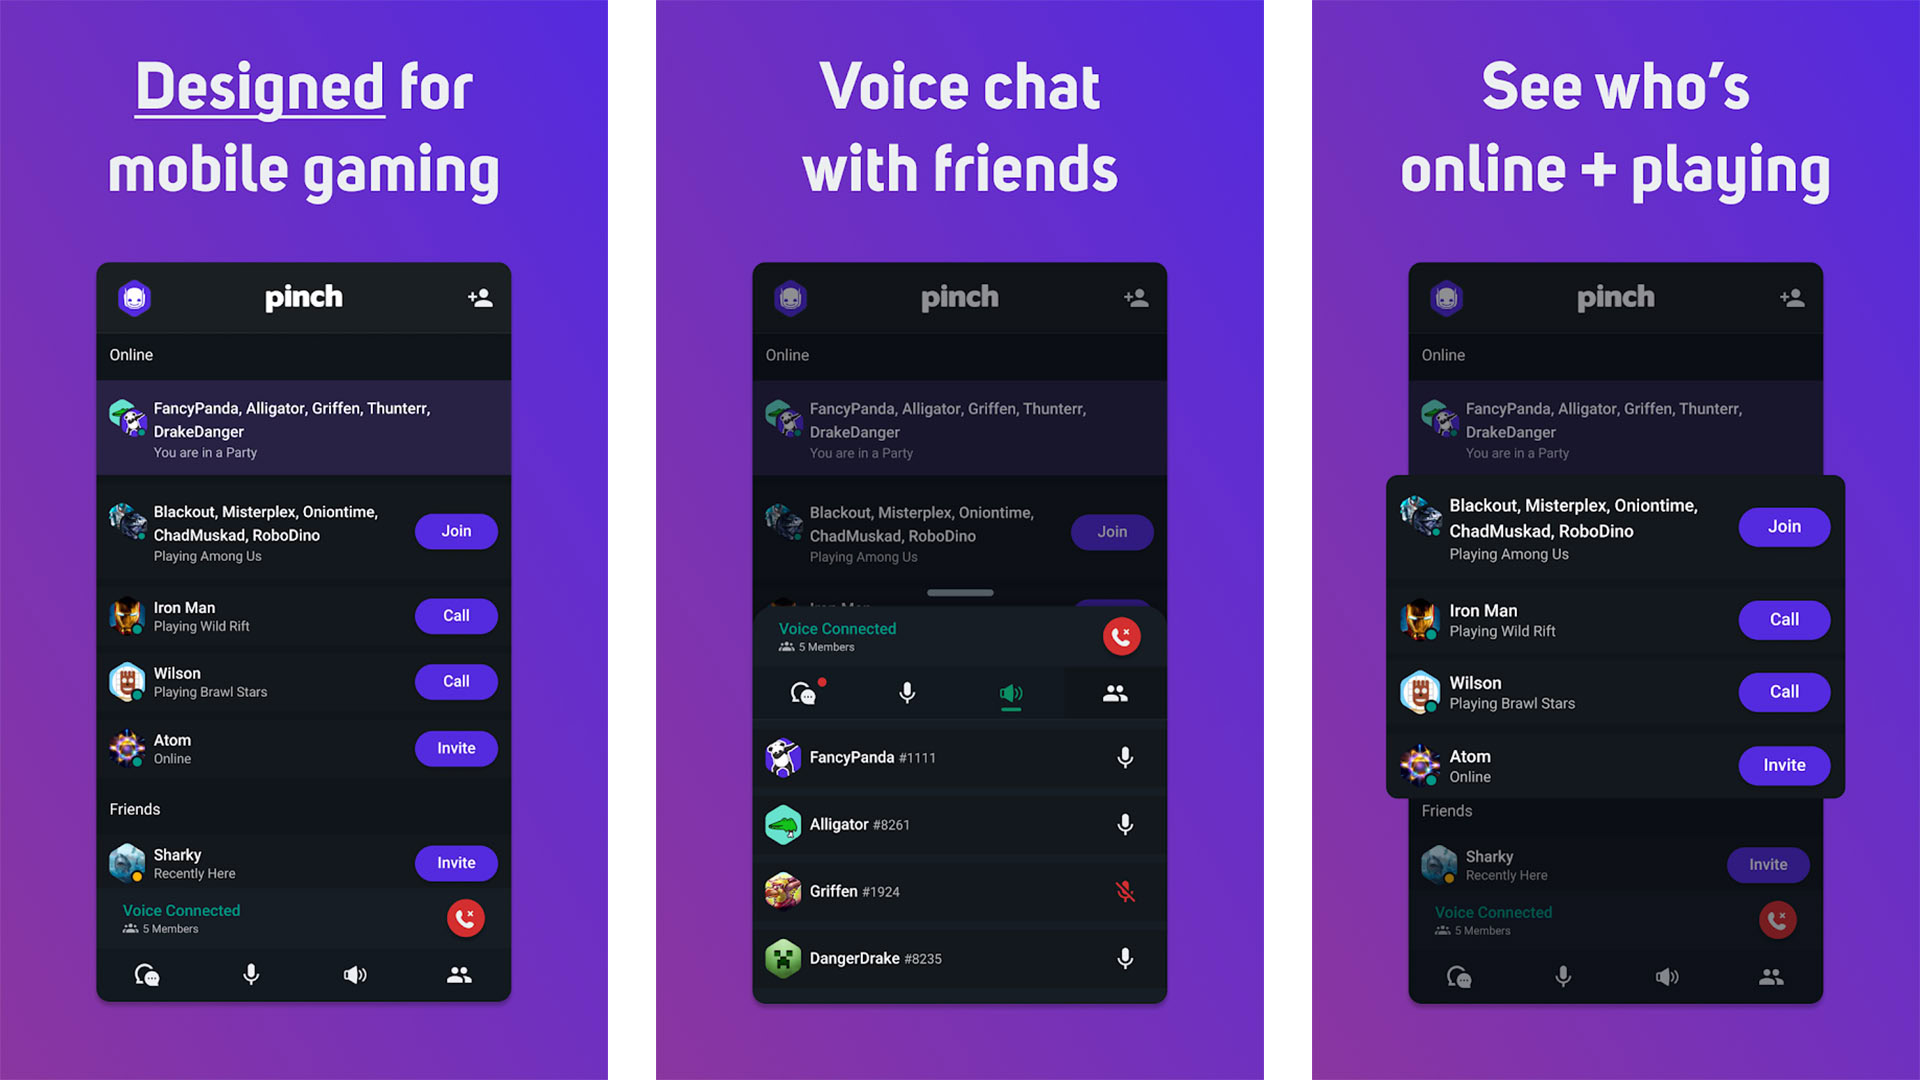 Best voice chat for mobile